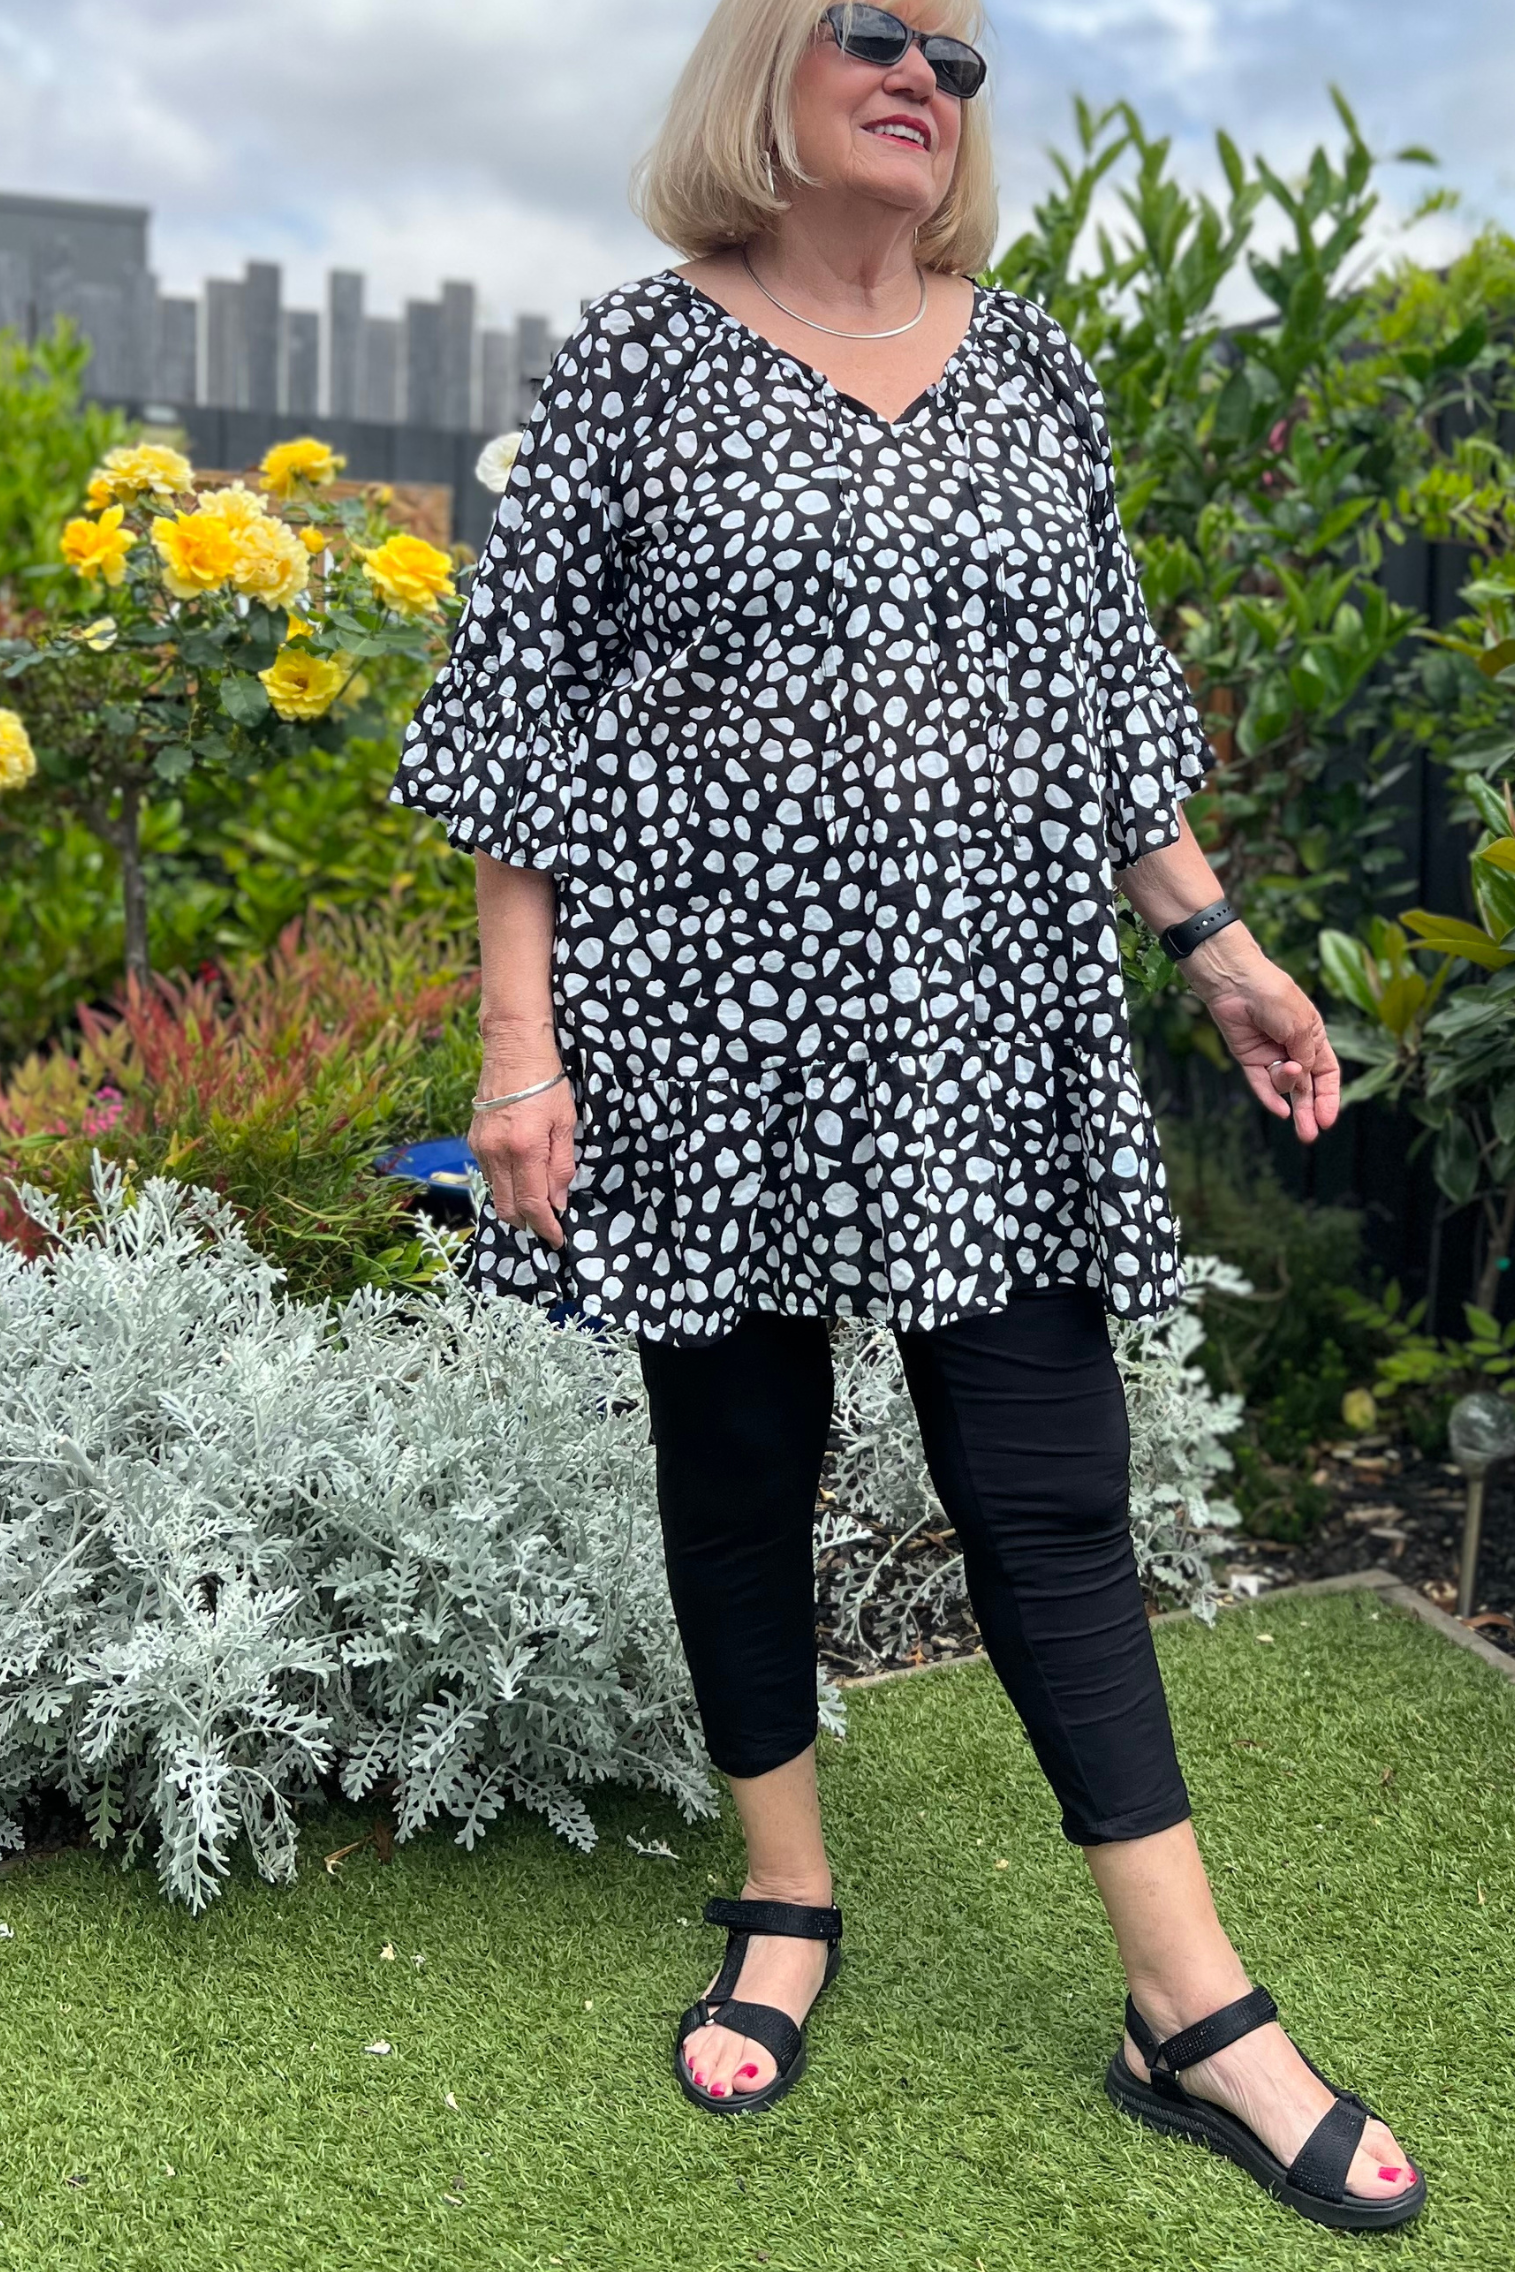 Kita Ku modelling the black 3/4 stretch legging, with a black and white cotton top in a garden setting. 